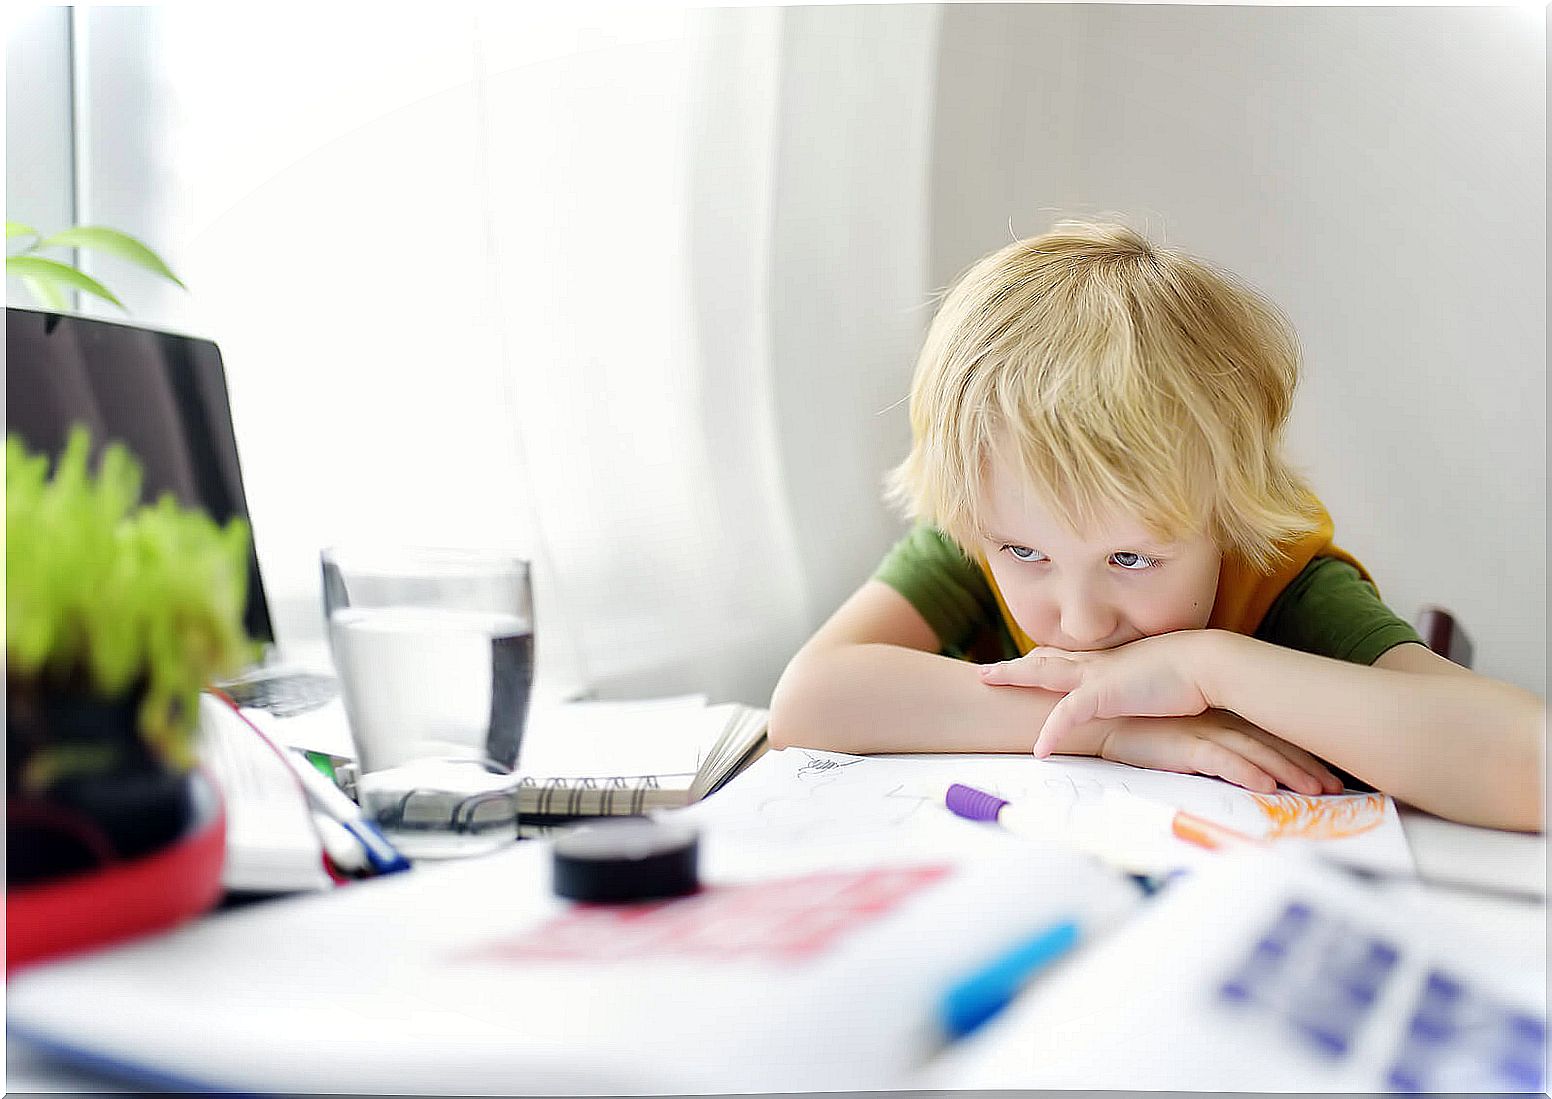 Child complaining because he does not want to do homework.